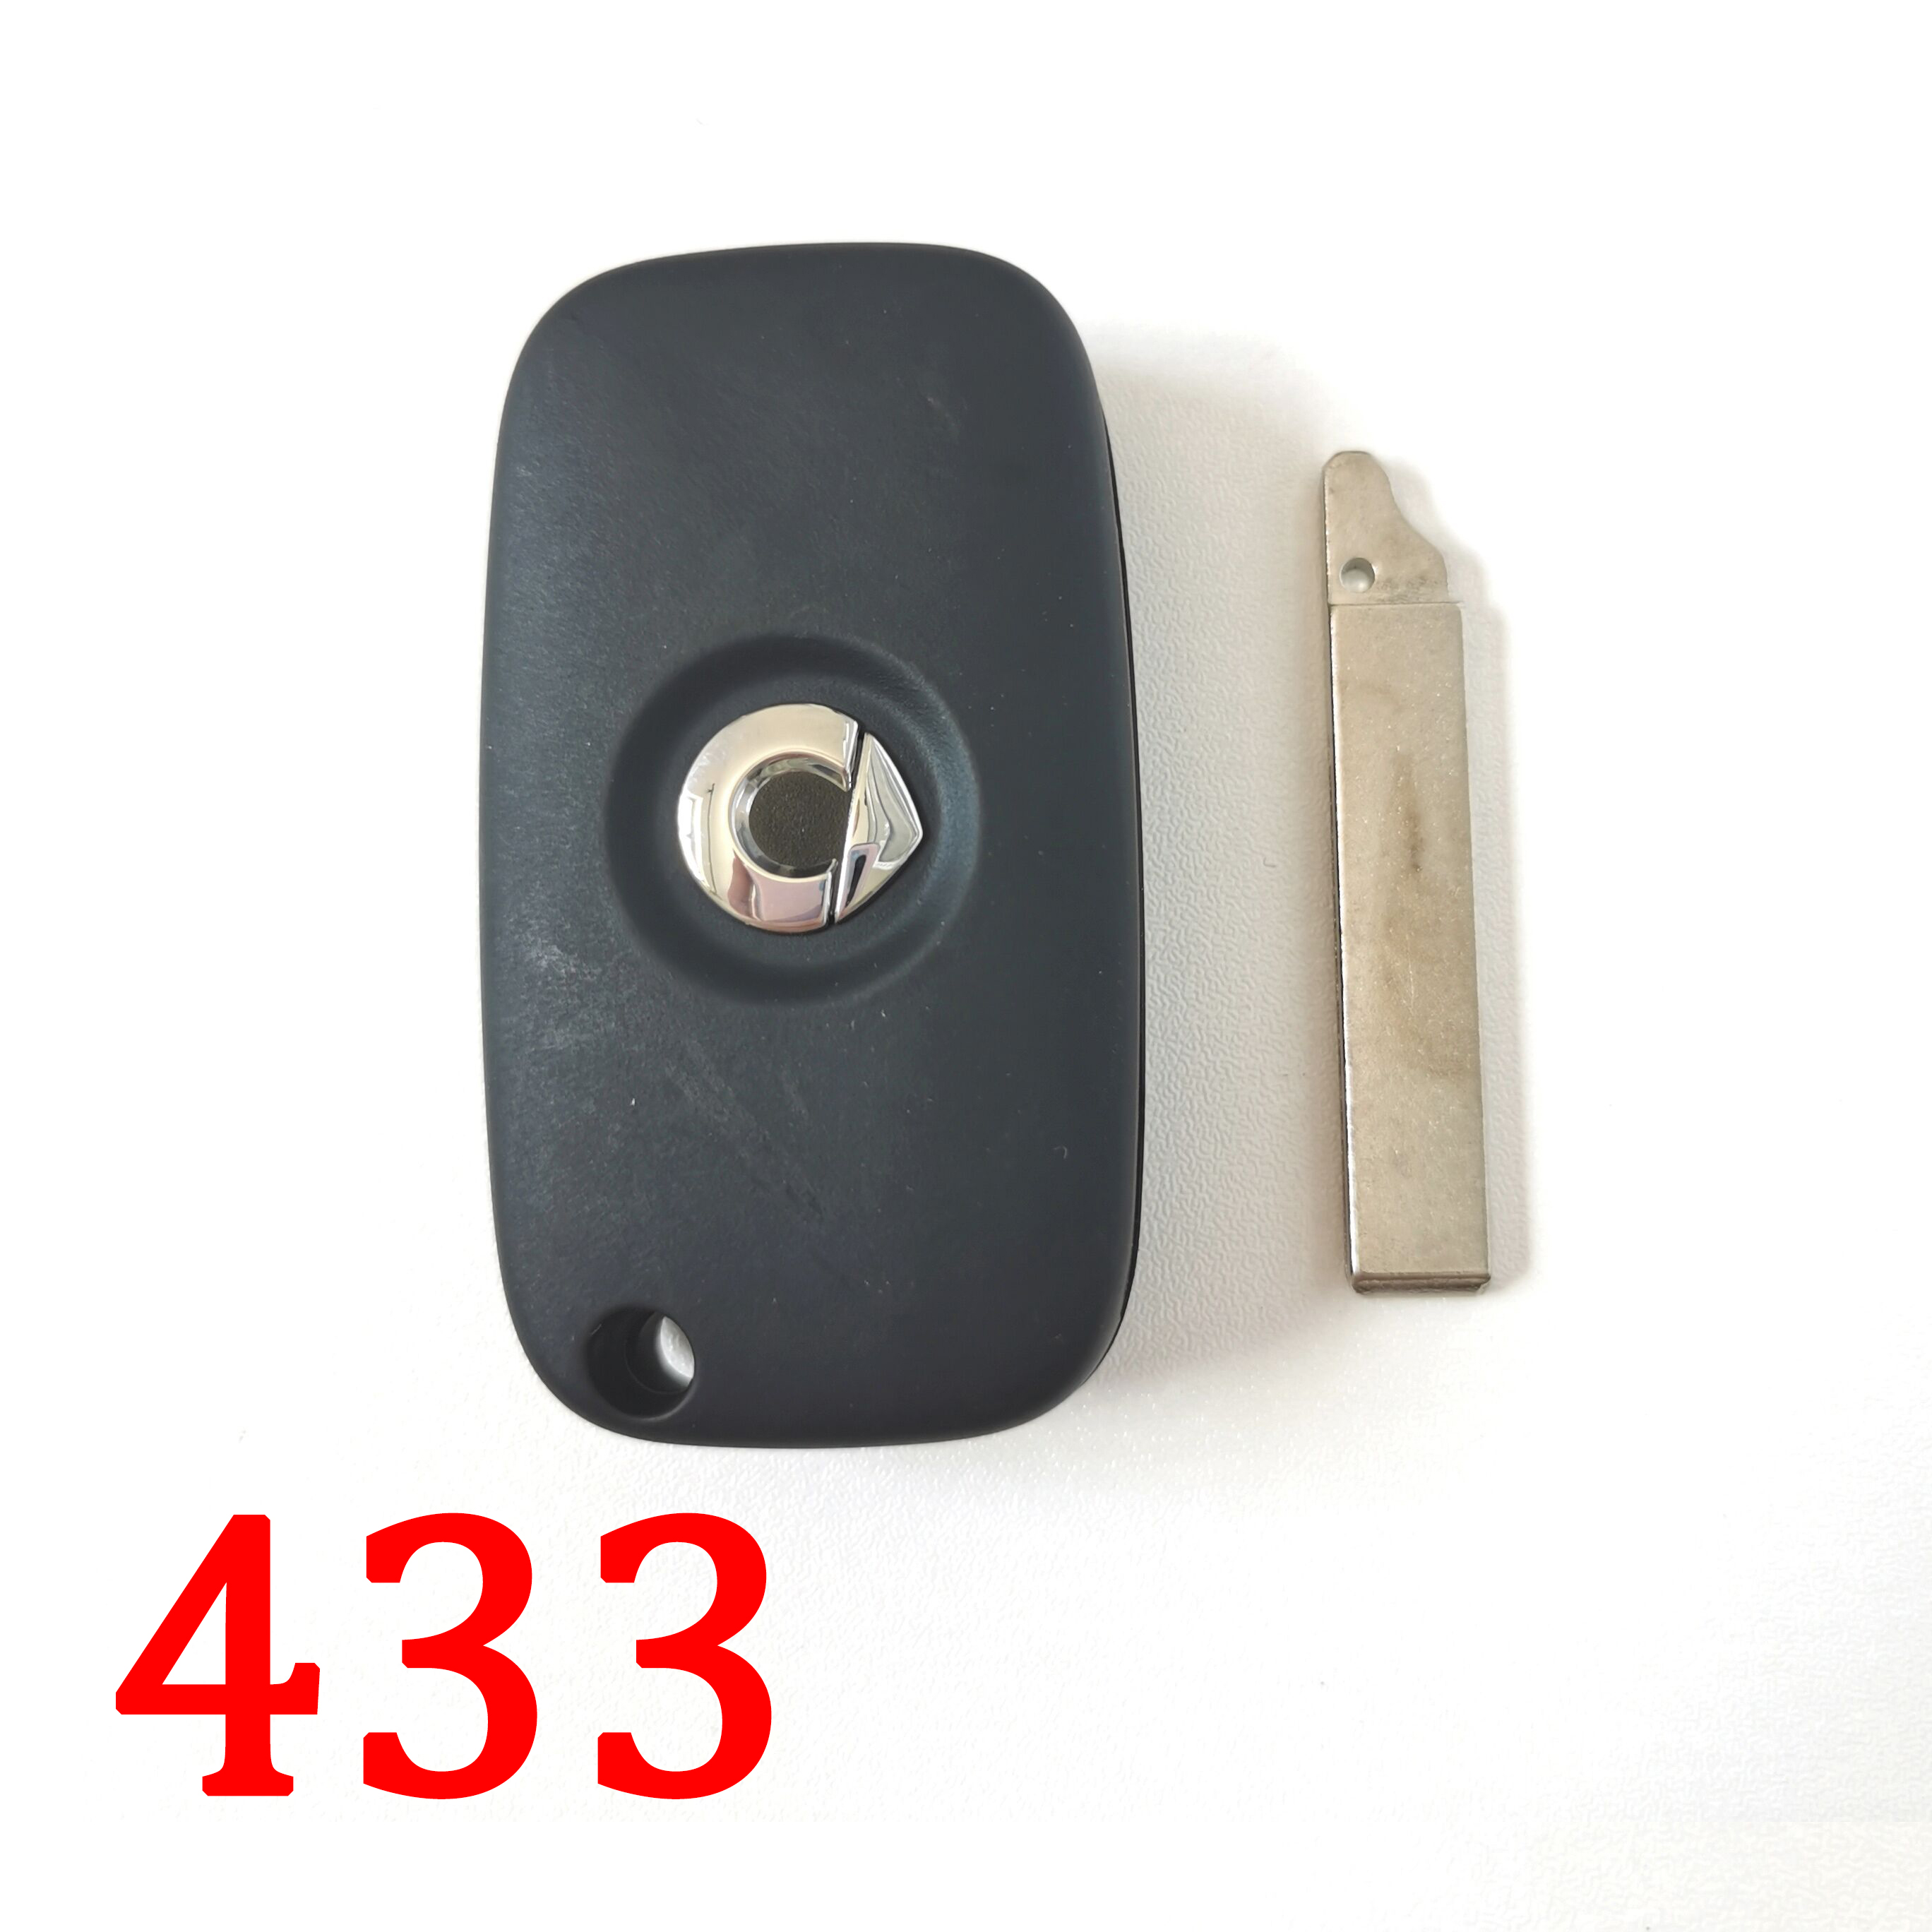 3 Buttons OEM Flip Remote Key 433MHz with 4A chip for Mercedes-Benz Smart Fortwo 453 Forfour 2015-2017